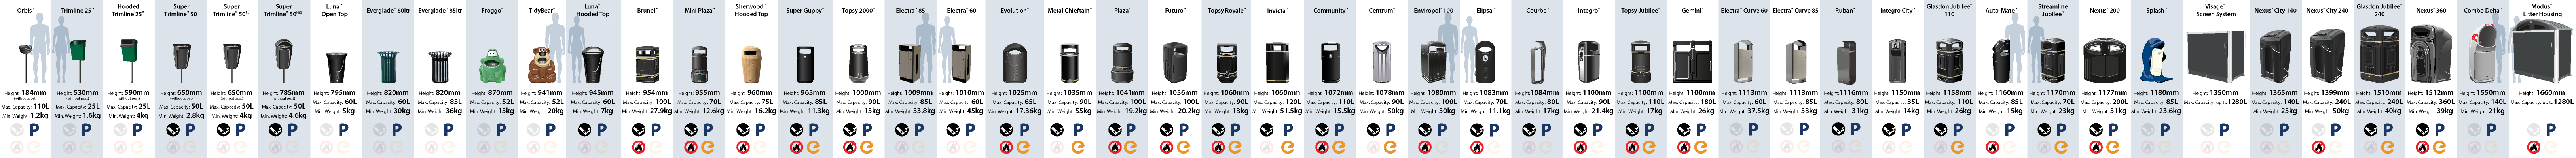 litter bin help guide with dimensions diagram